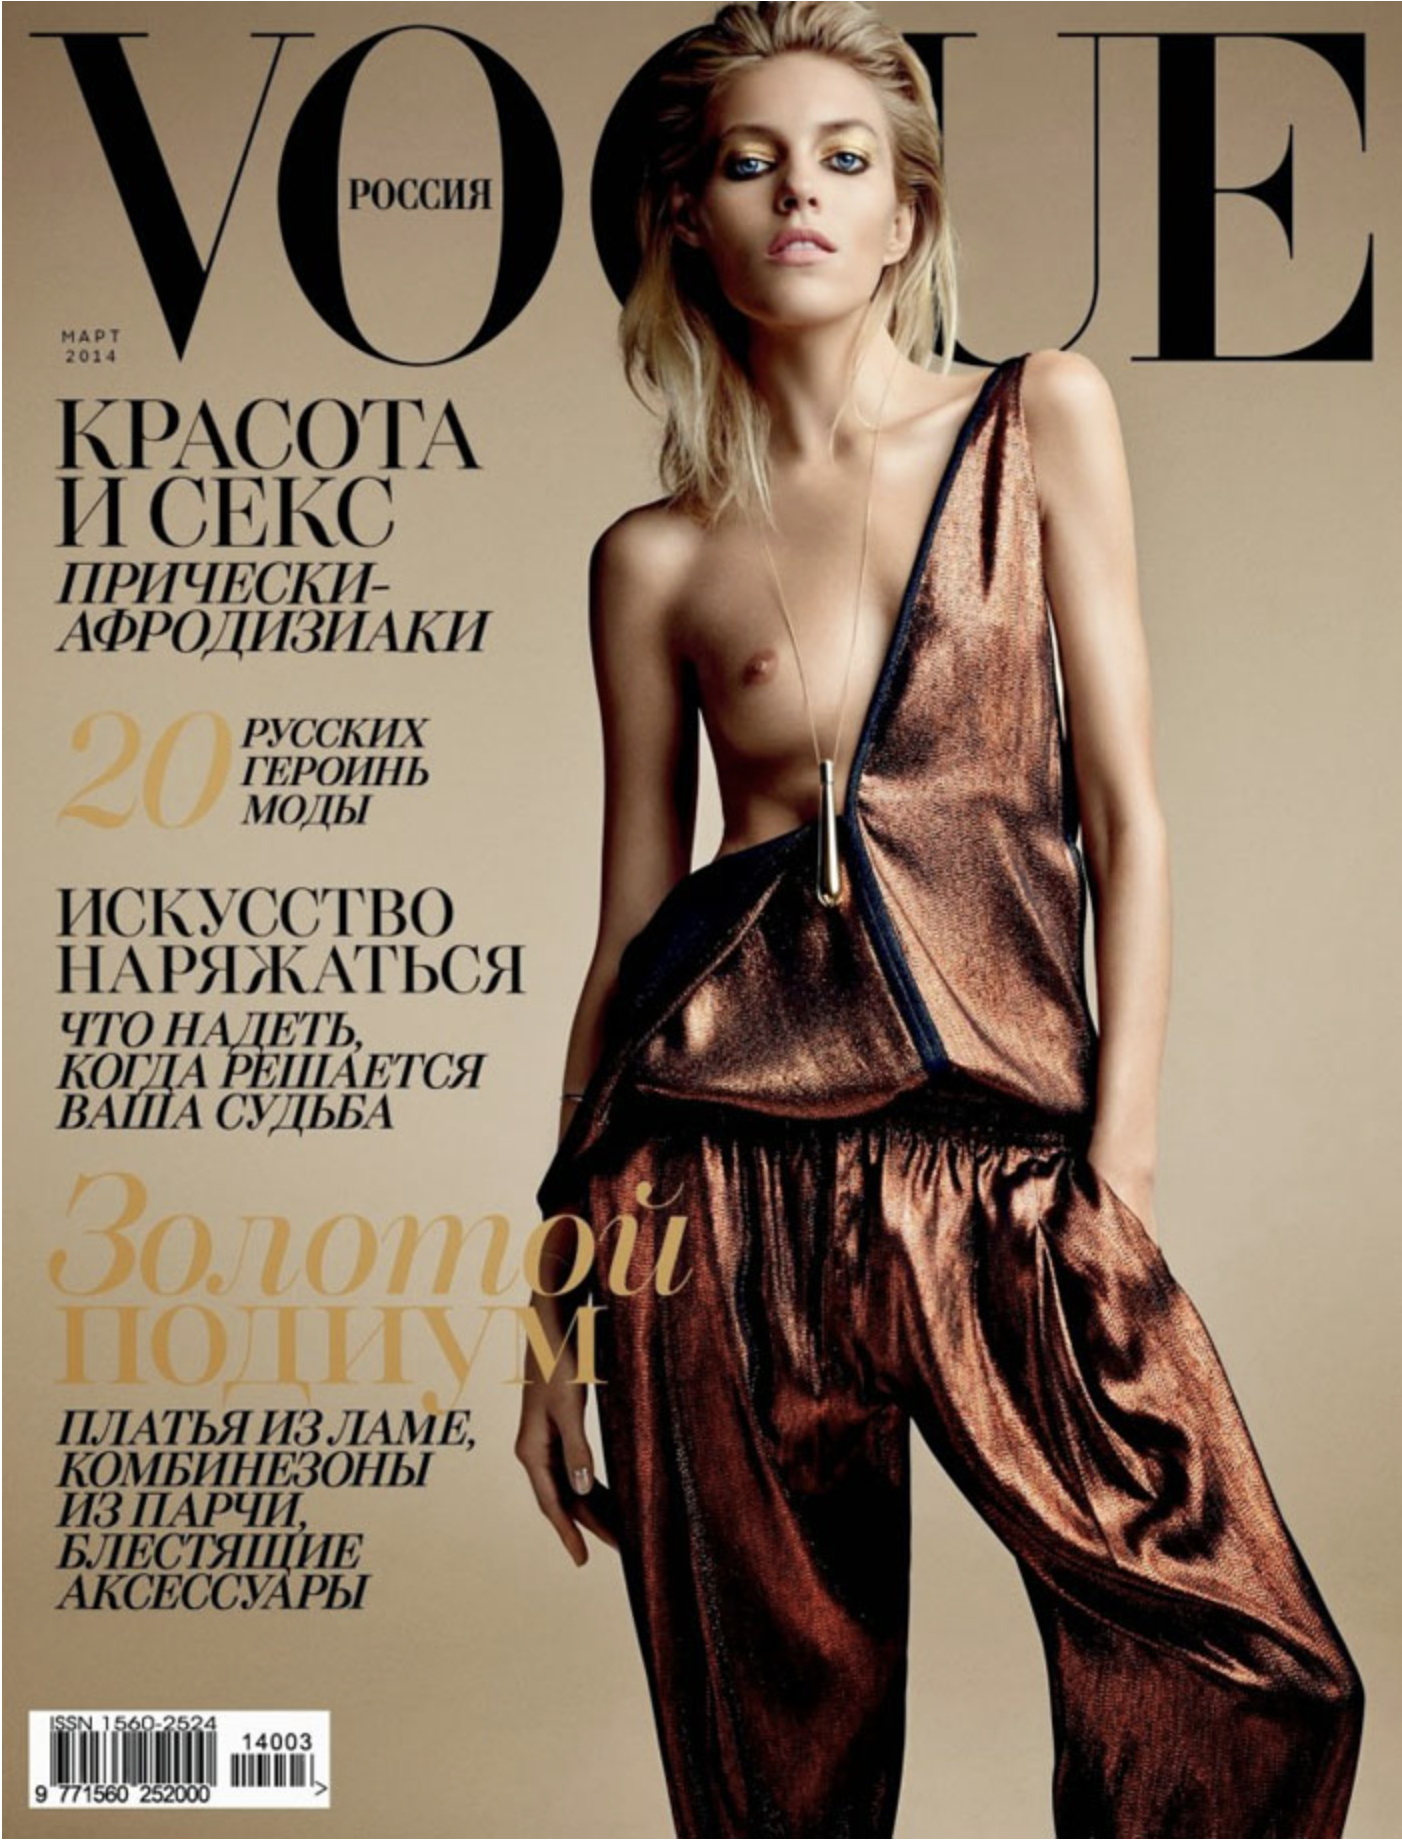 Anja-Rubik-by-Patrick-Demarchelier-Vogue-Russia-2014-2.png